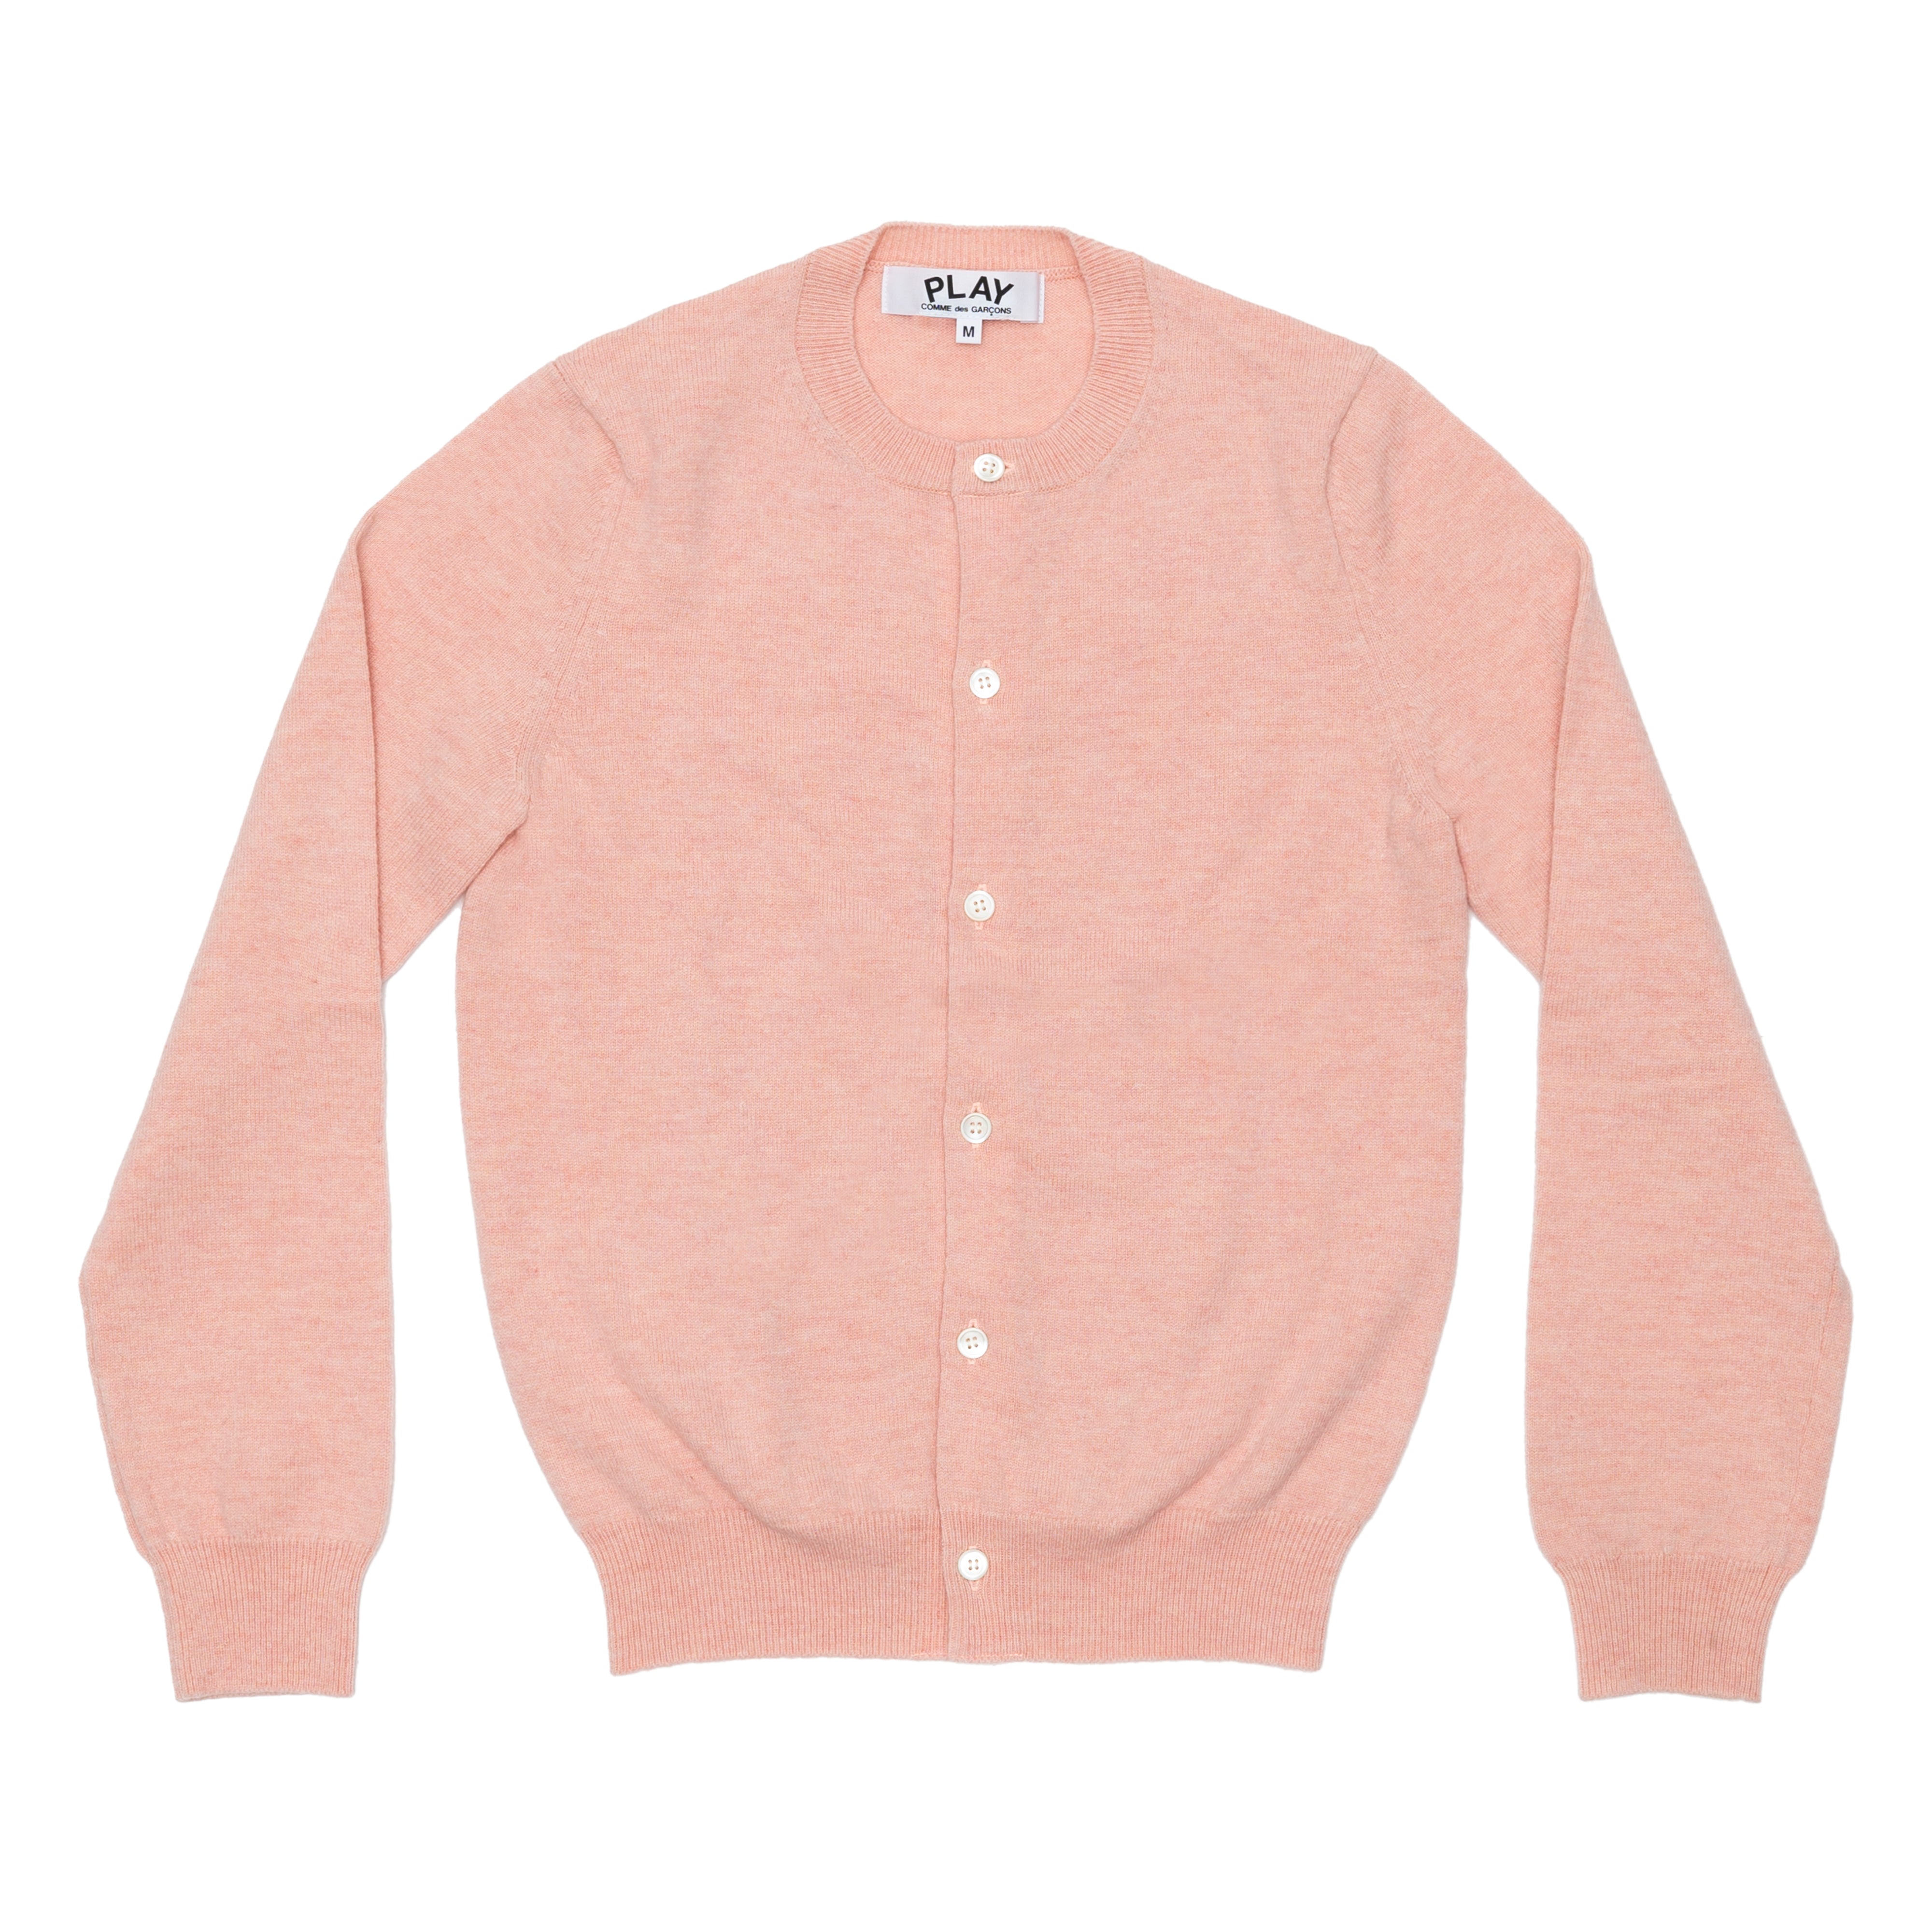 PLAY CDG - Top Dyed Carded Lambswool Women's Cardigan - (Pink